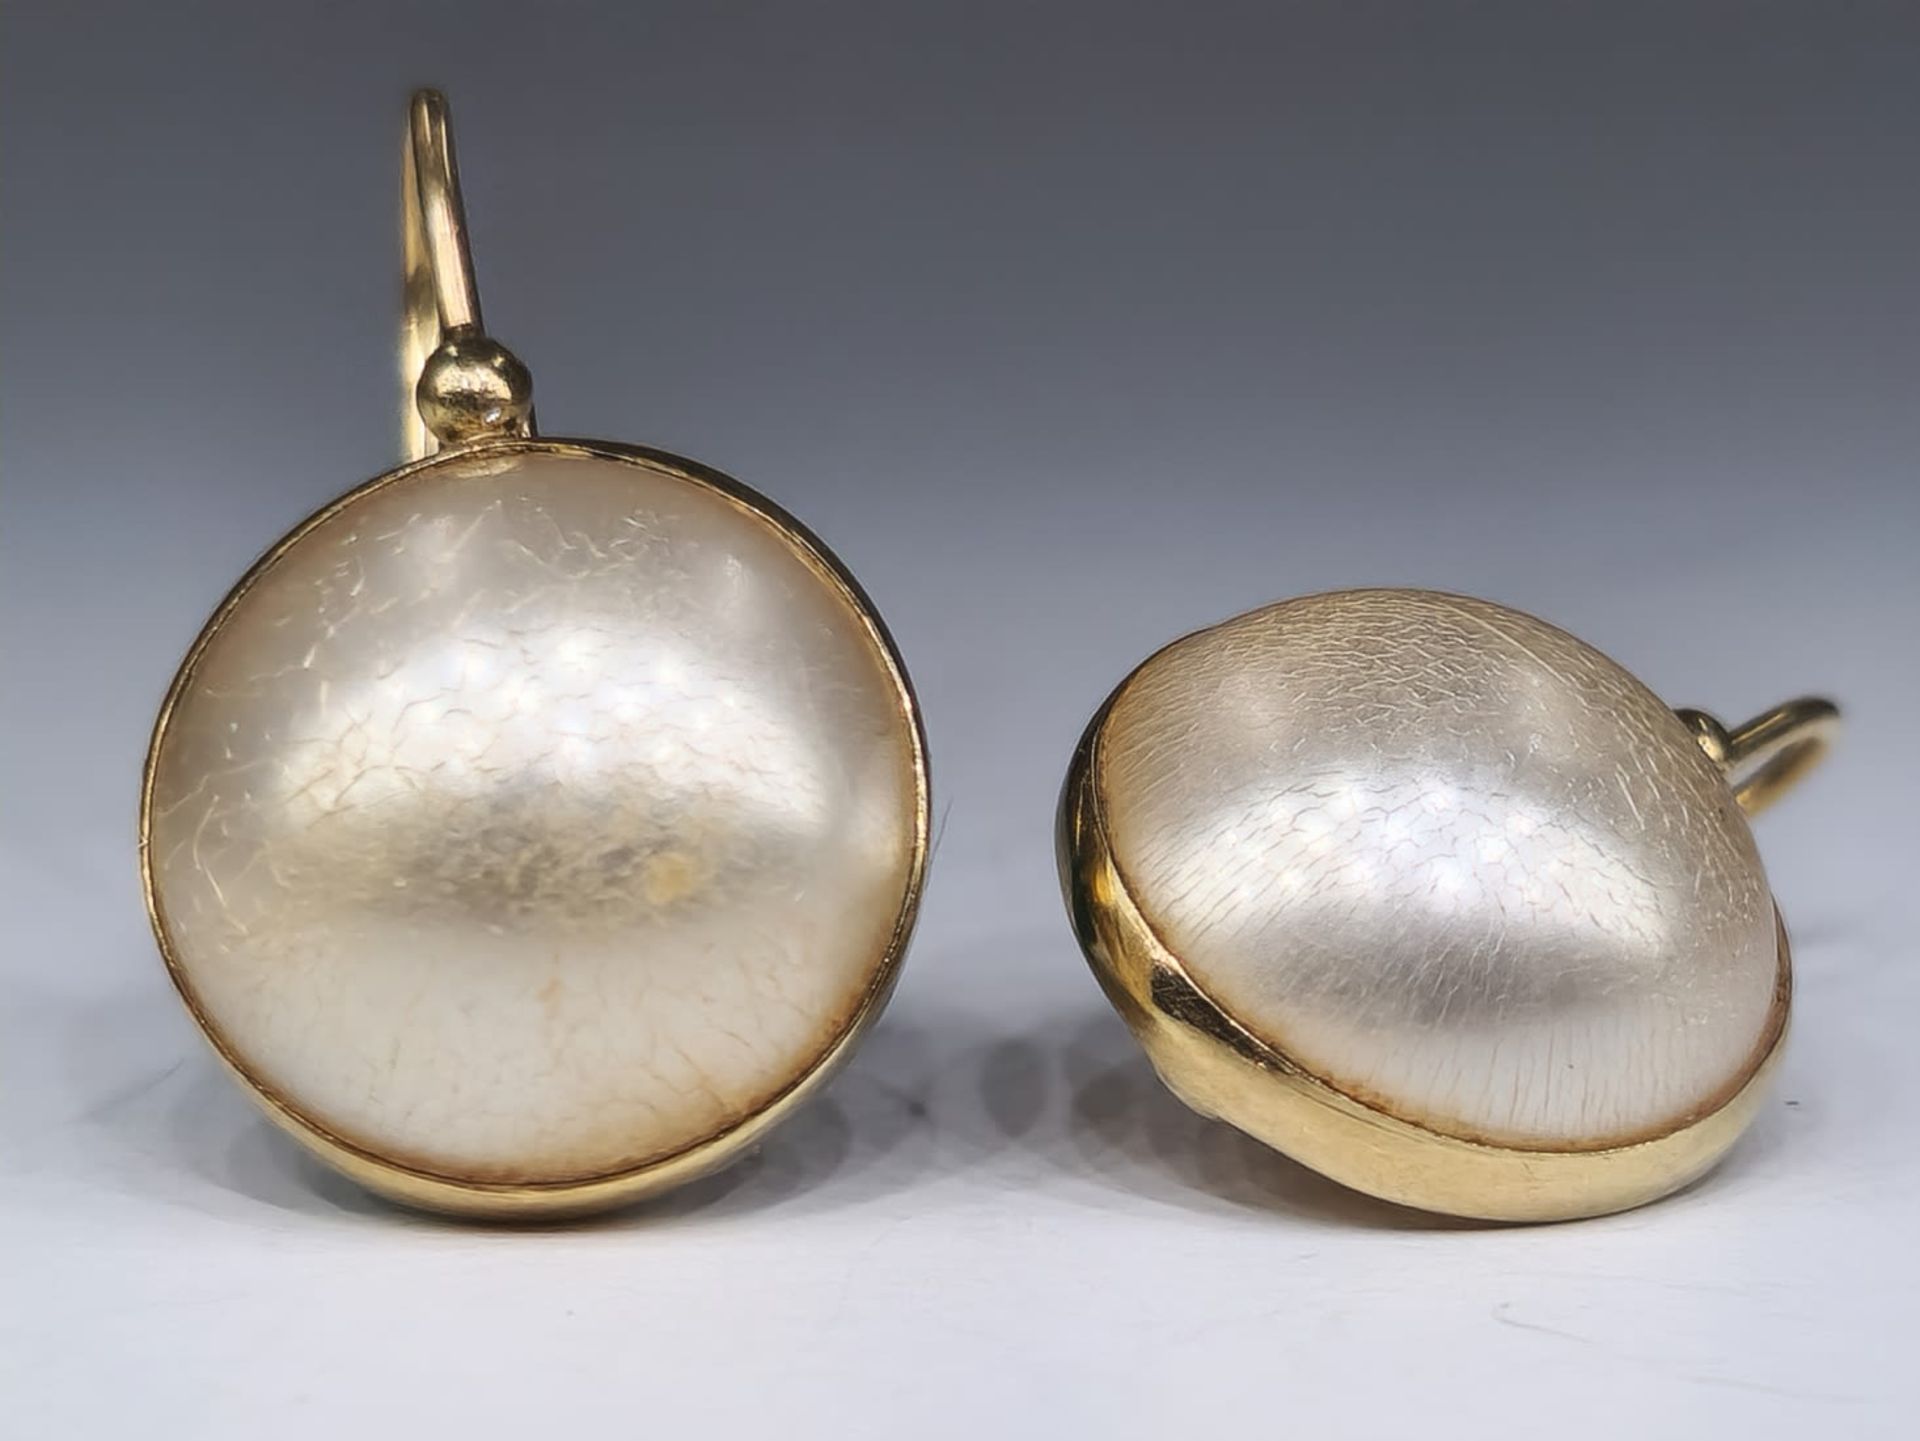 A pair of 14K gold earrings with blood pearls, unsigned but the purity of the gold is tested, - Image 2 of 2